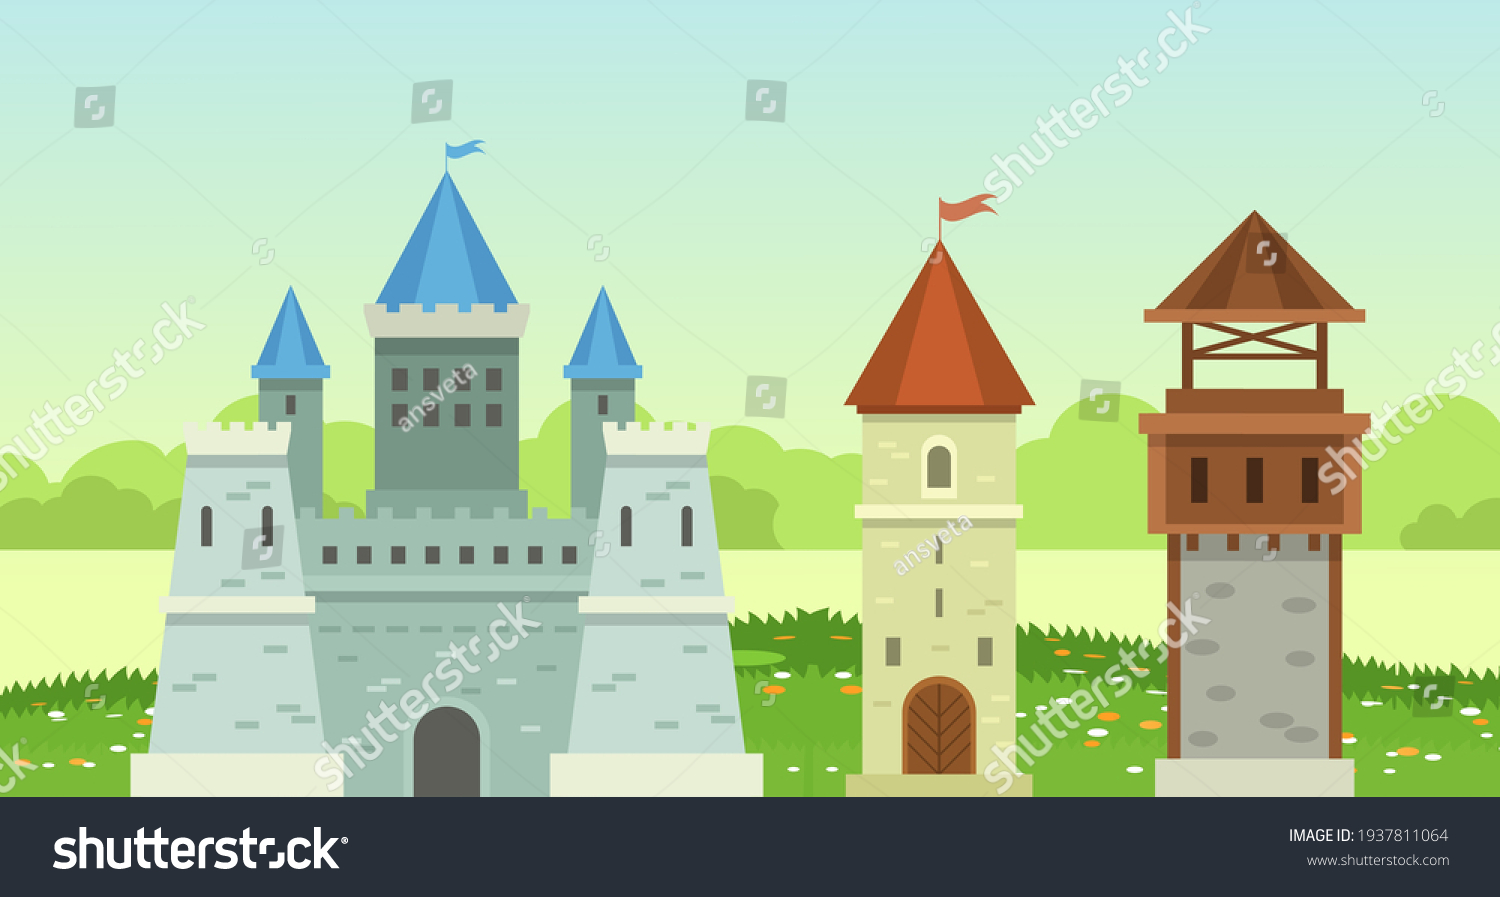 SVG of Castle medieval tower. The fairytale medieval tower,princess castle, fortified palace with gates, medieval buildings, historical towered house cartoon on background of beautiful nature vector svg